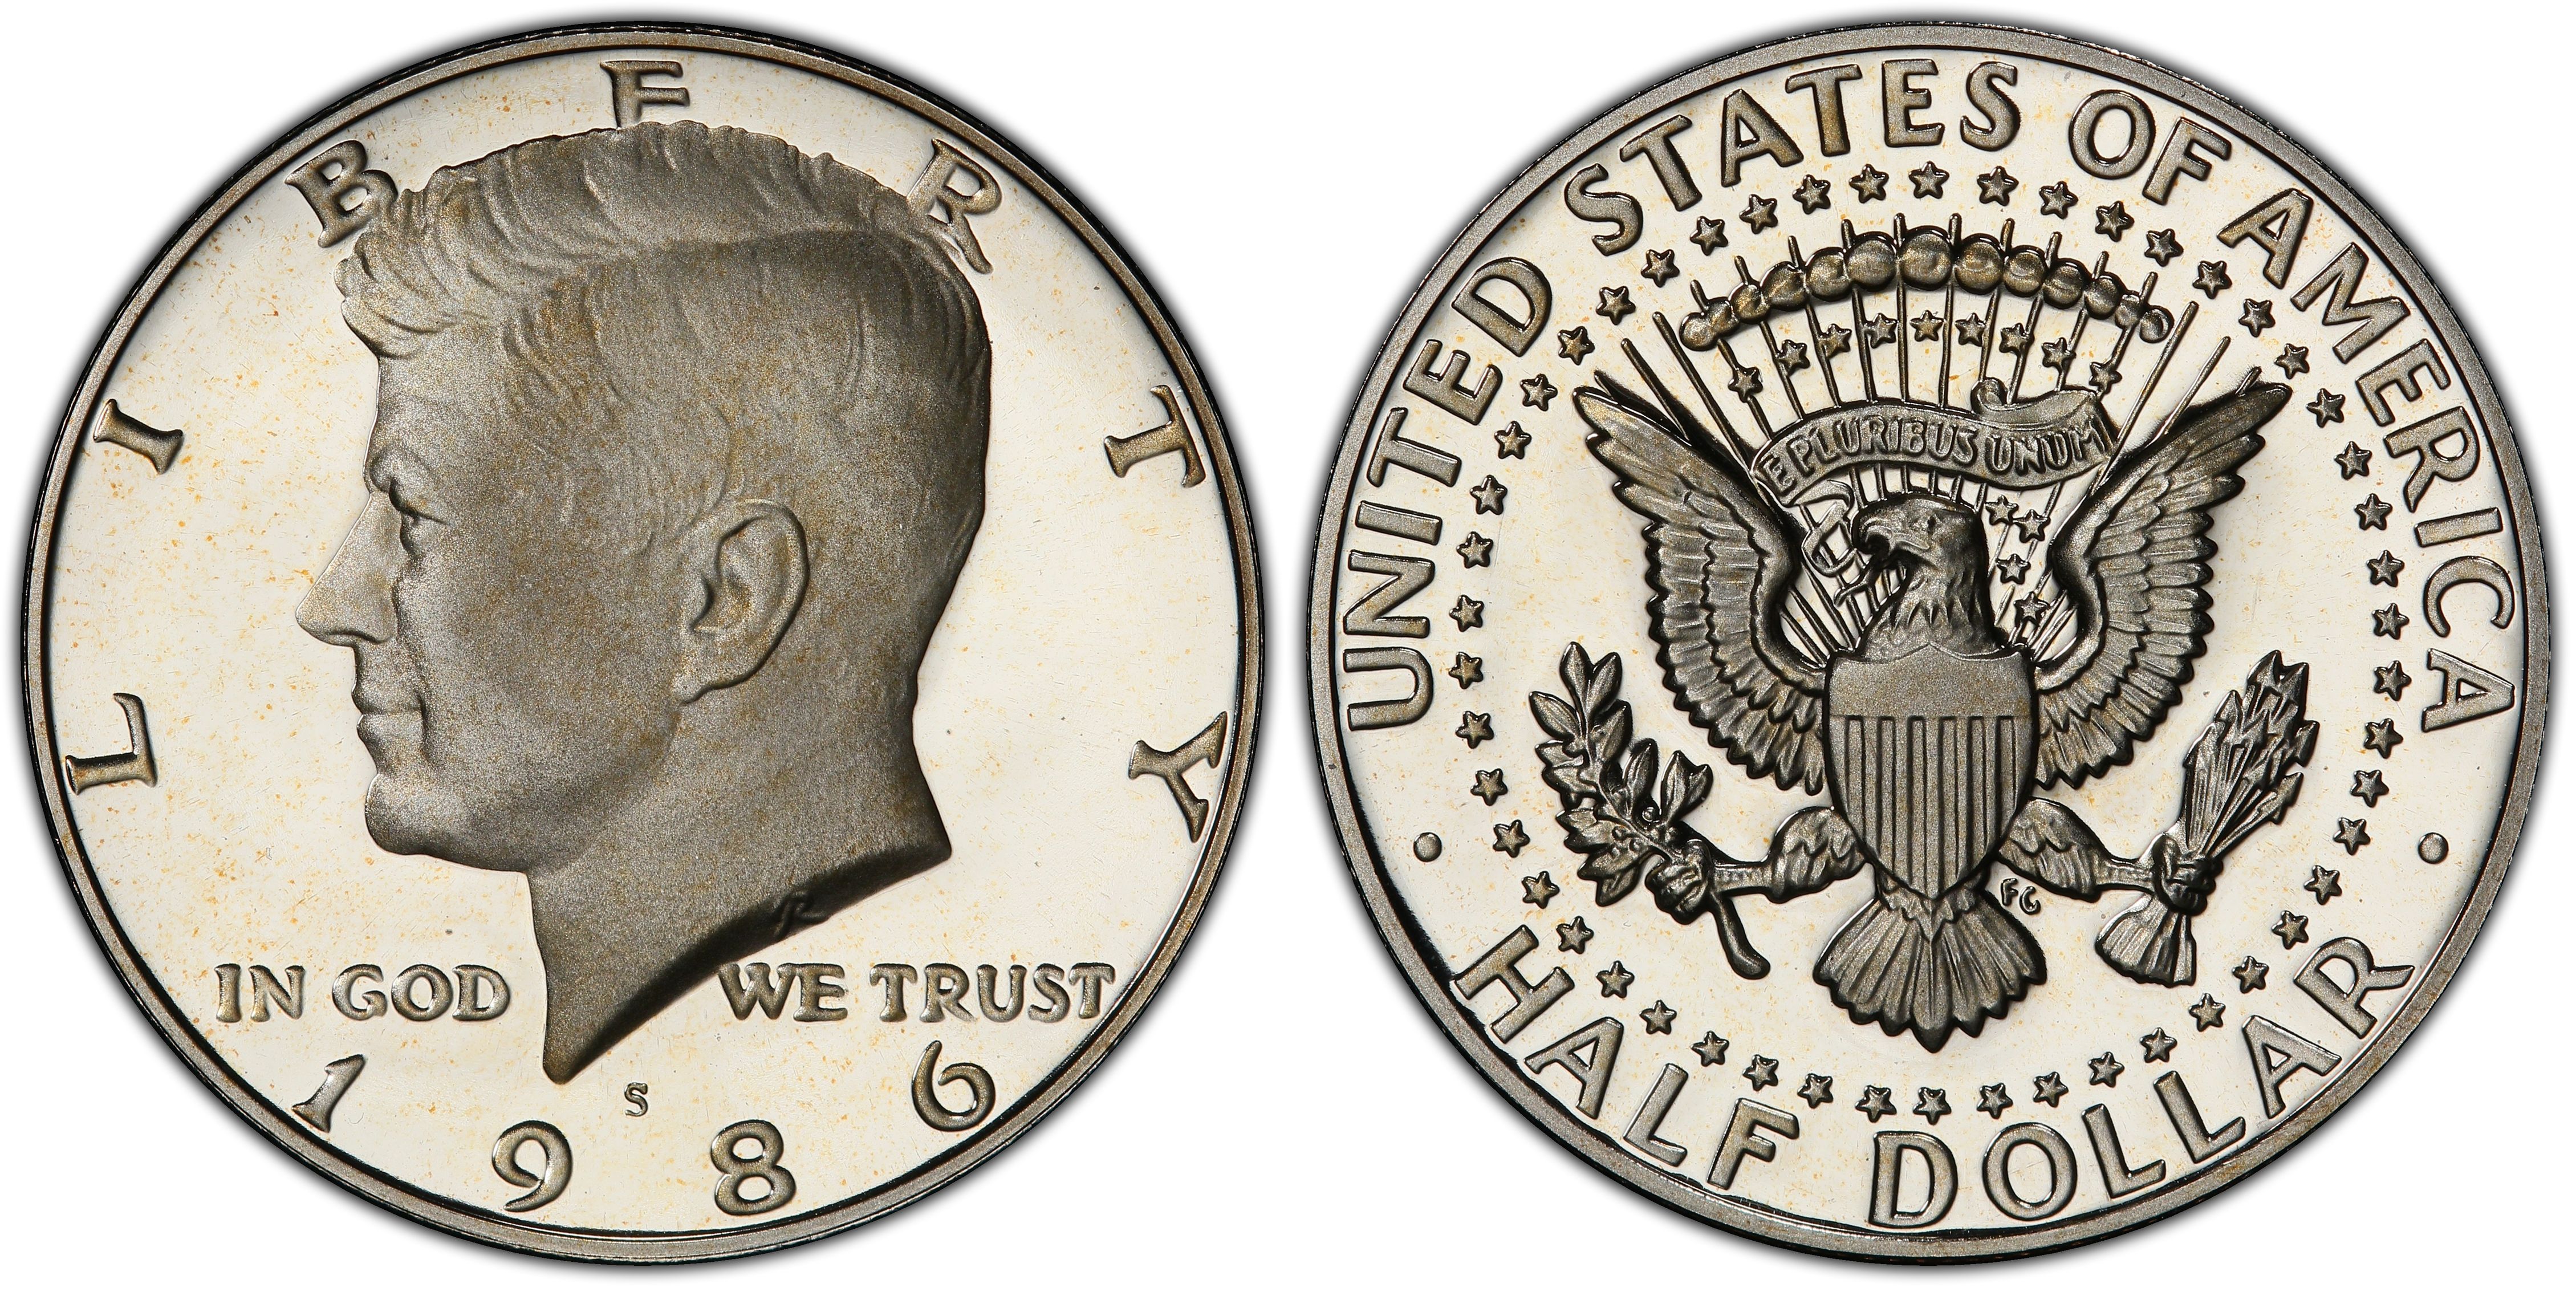 Details about   1986 S KENNEDY CAMEO PROOF HALF DOLLAR 